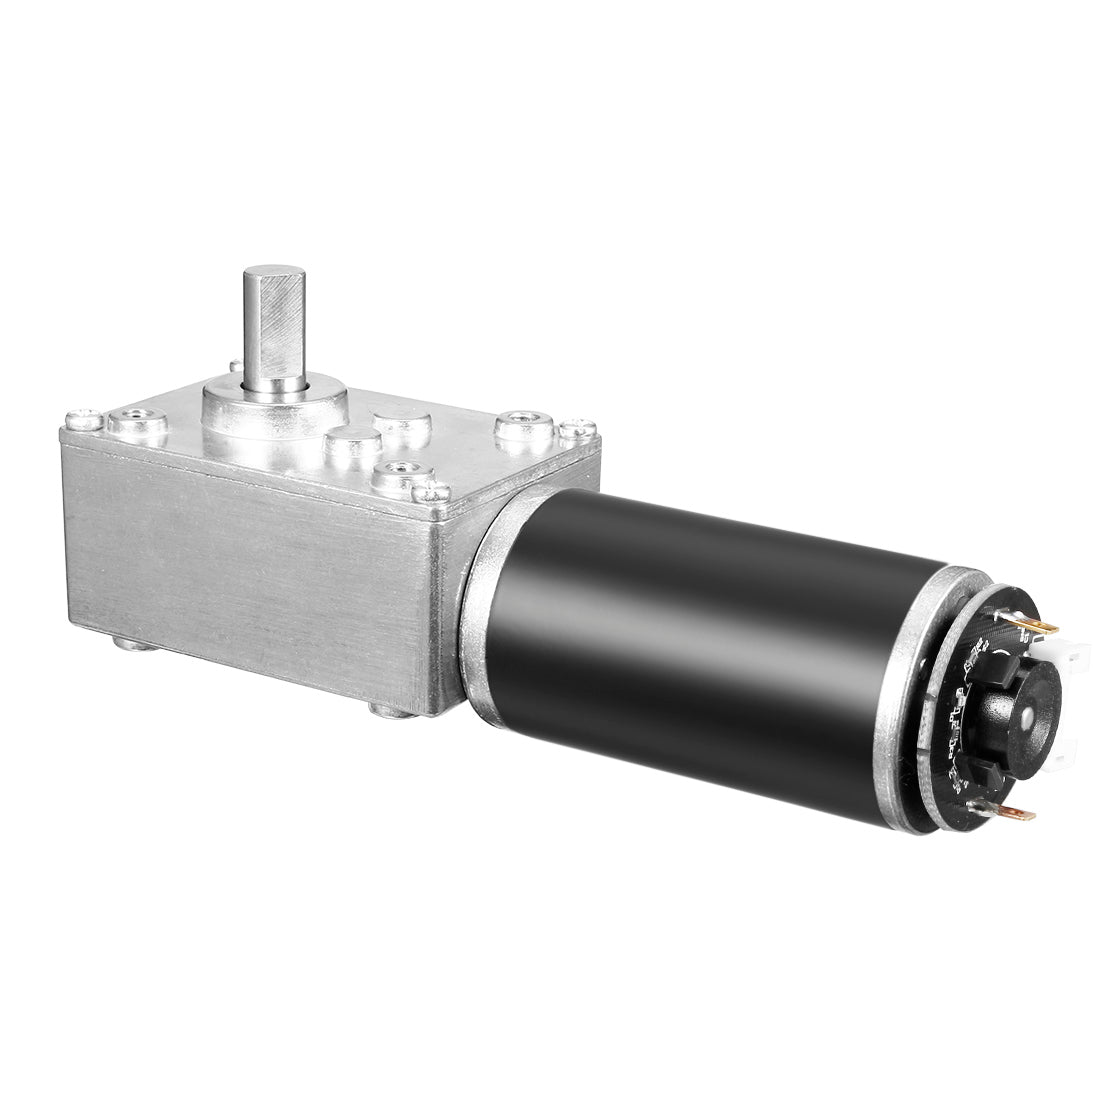 uxcell Uxcell DC 12V 74RPM 6.4Kg.cm Self-Locking Worm Gear Motor With Encoder And Cable, High Torque Speed Reduction Motor